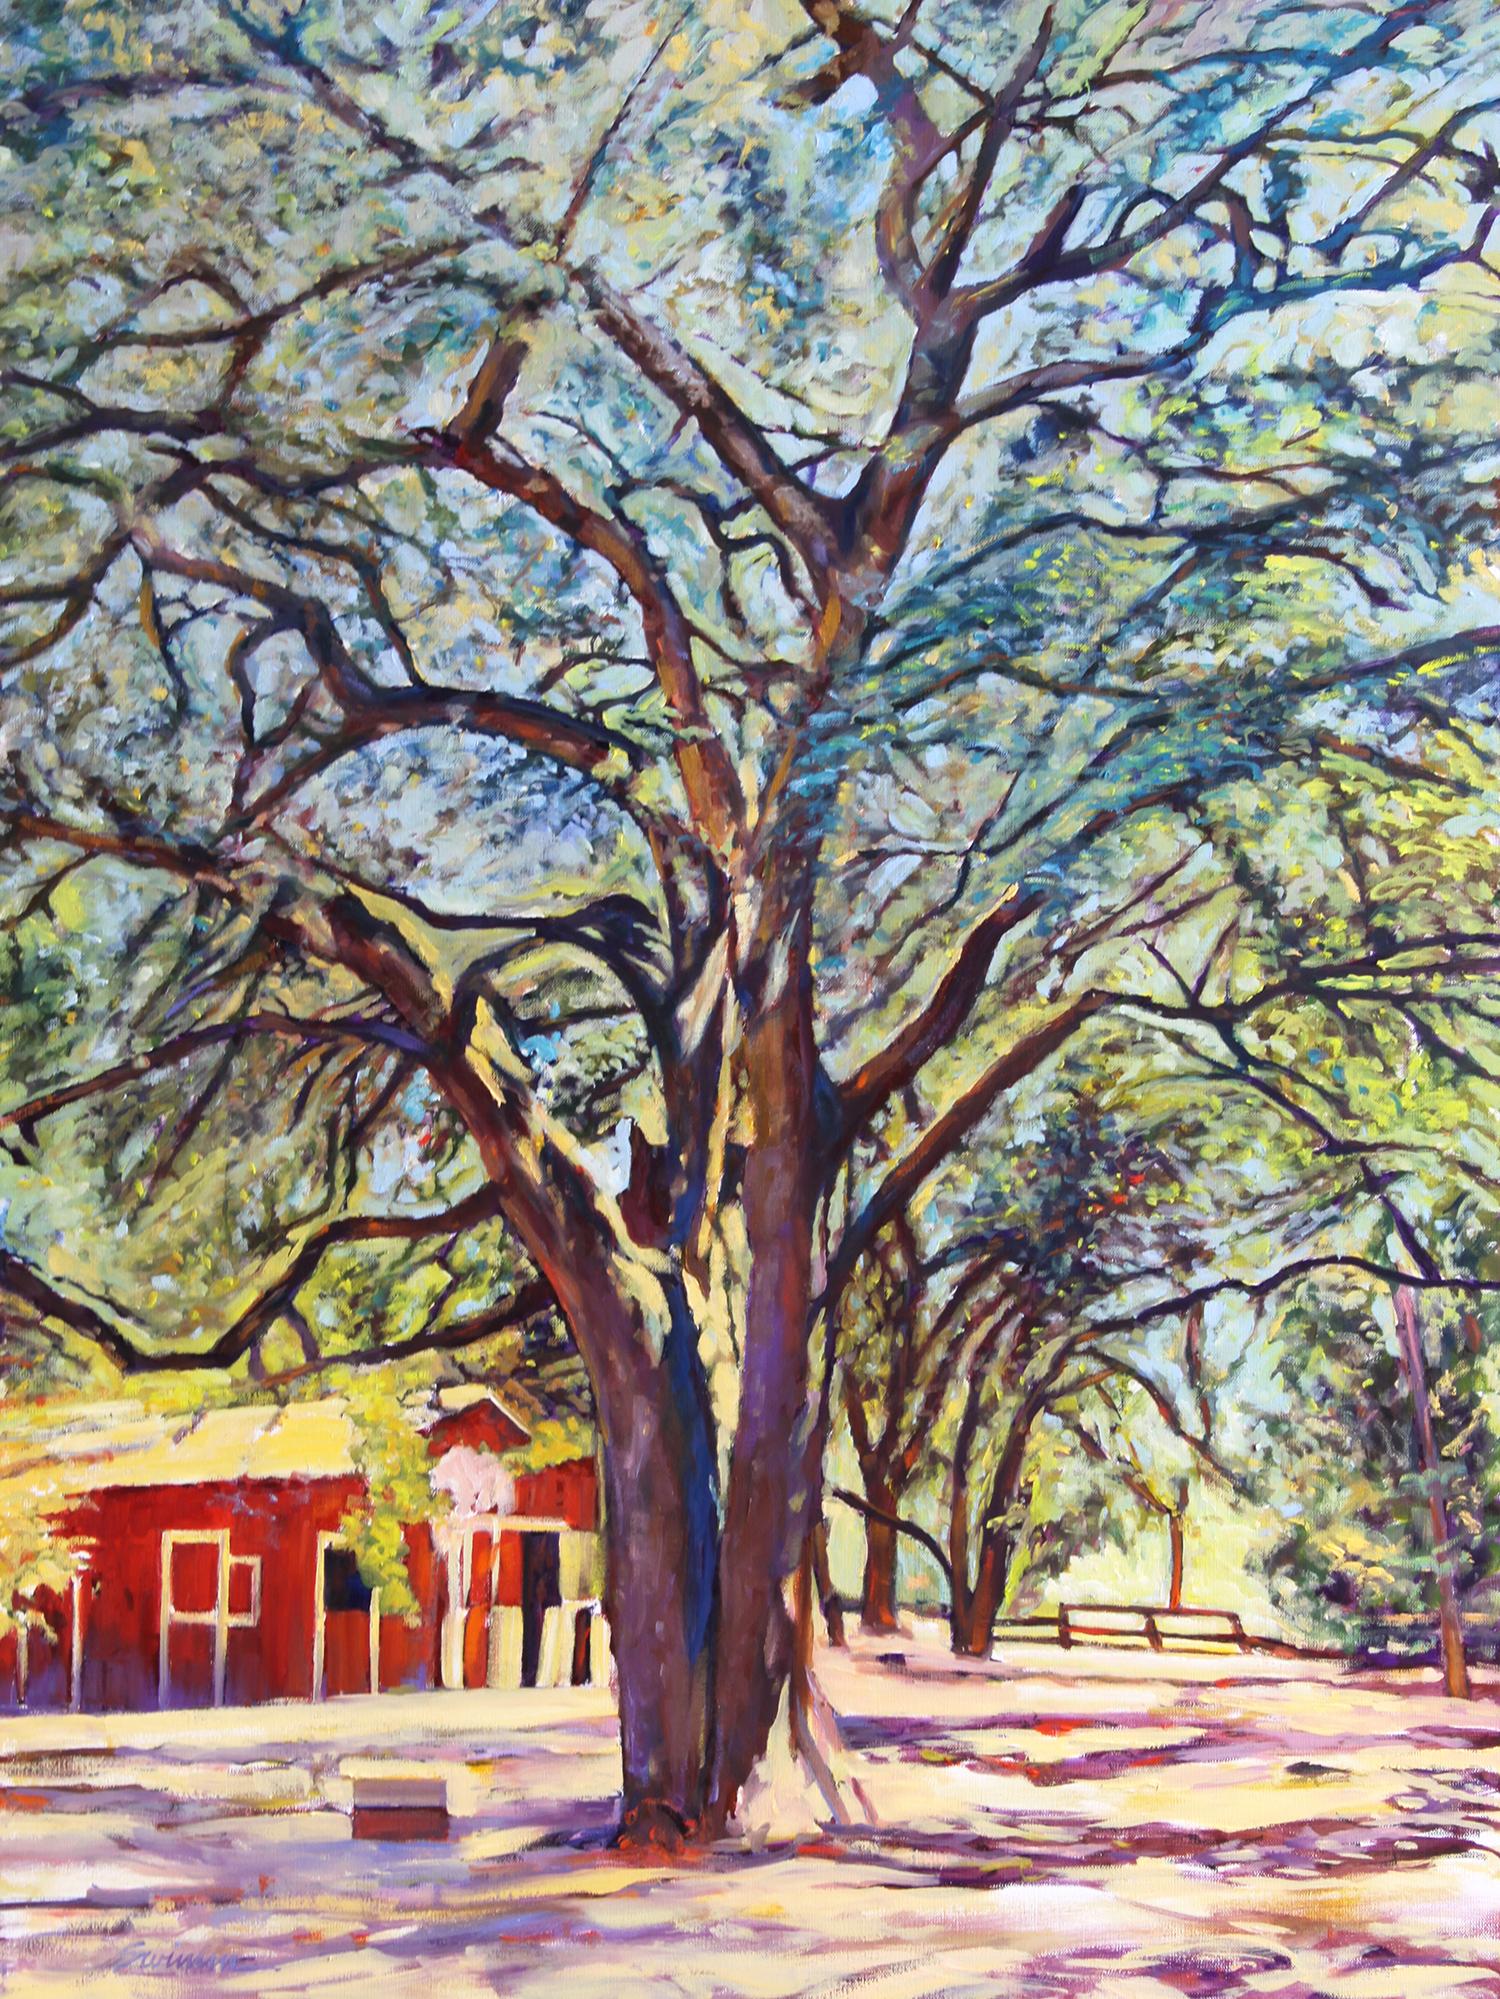 Tom Swimm Landscape Painting - "Sonoma Oak" Grand Old Tree with Colorful Shadows